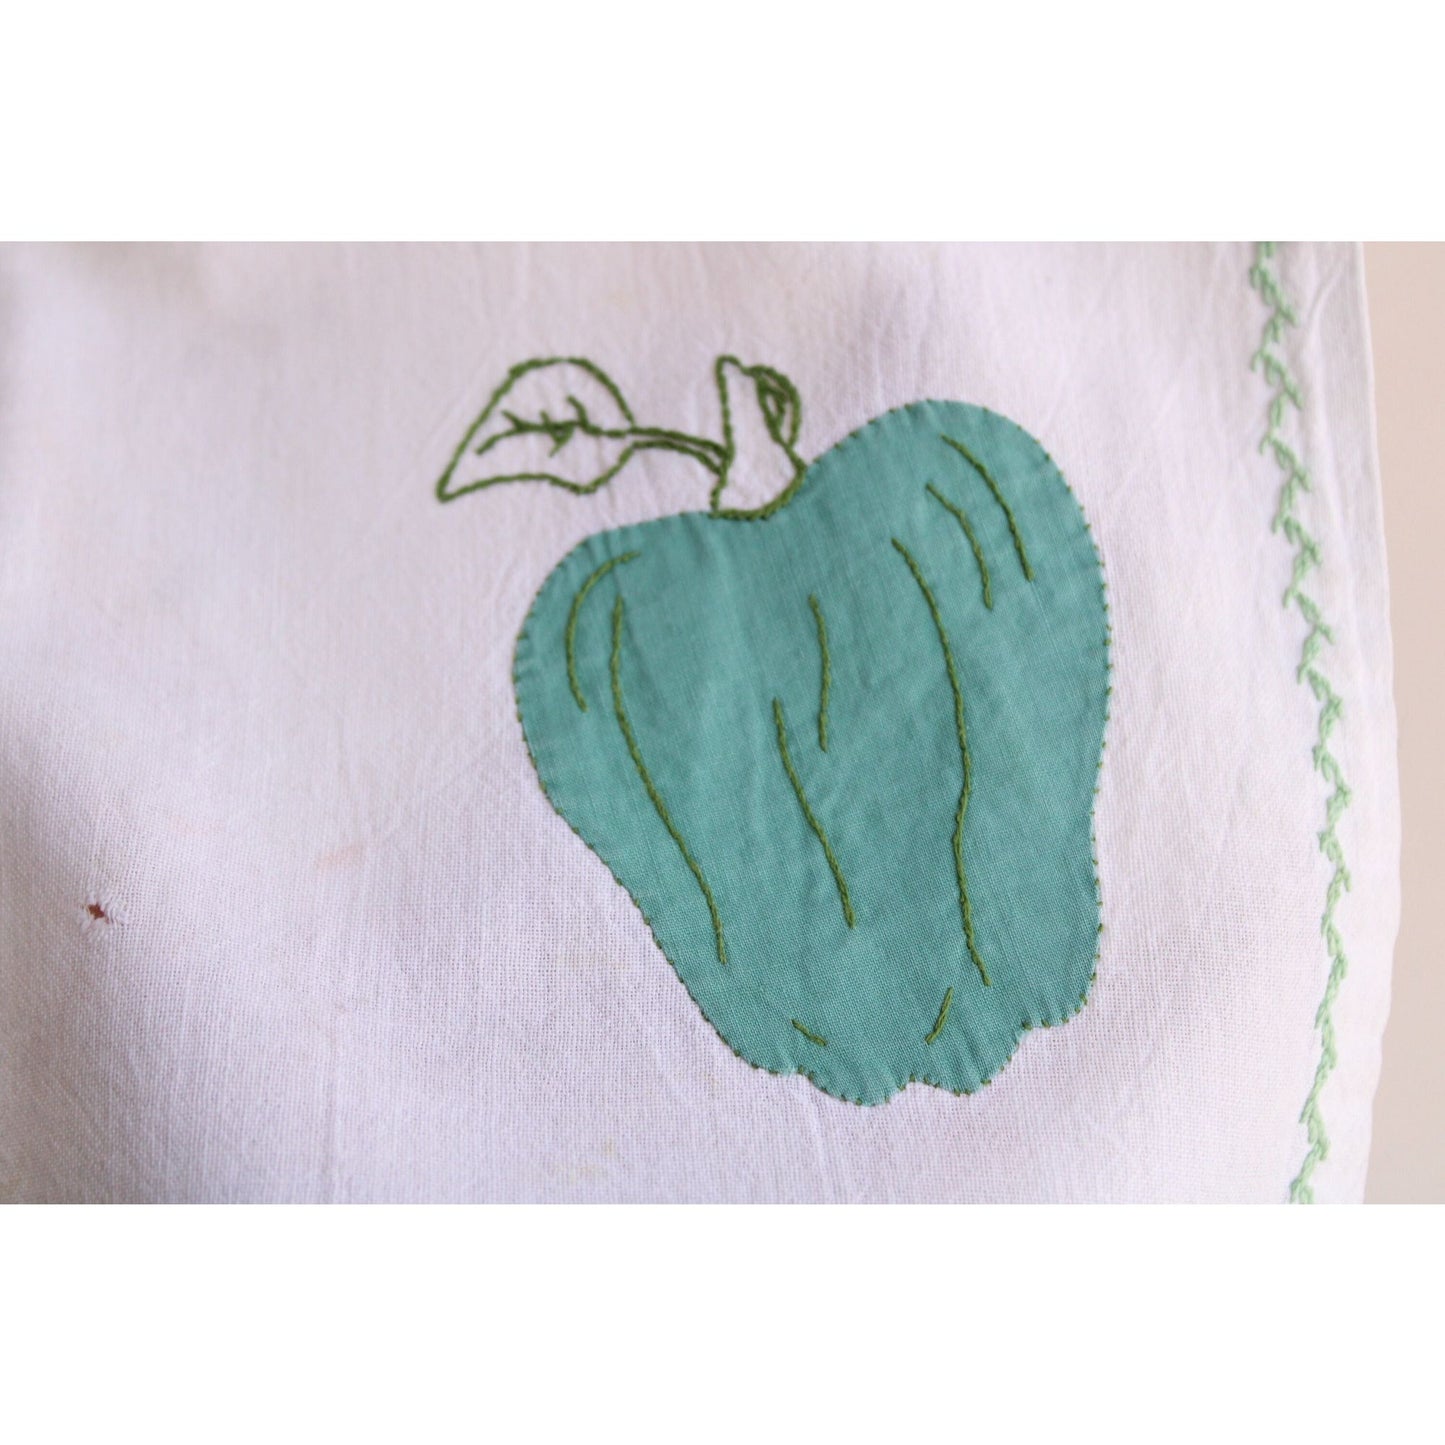 Vintage 1950s Tablecloth or Towel with Apple Applique